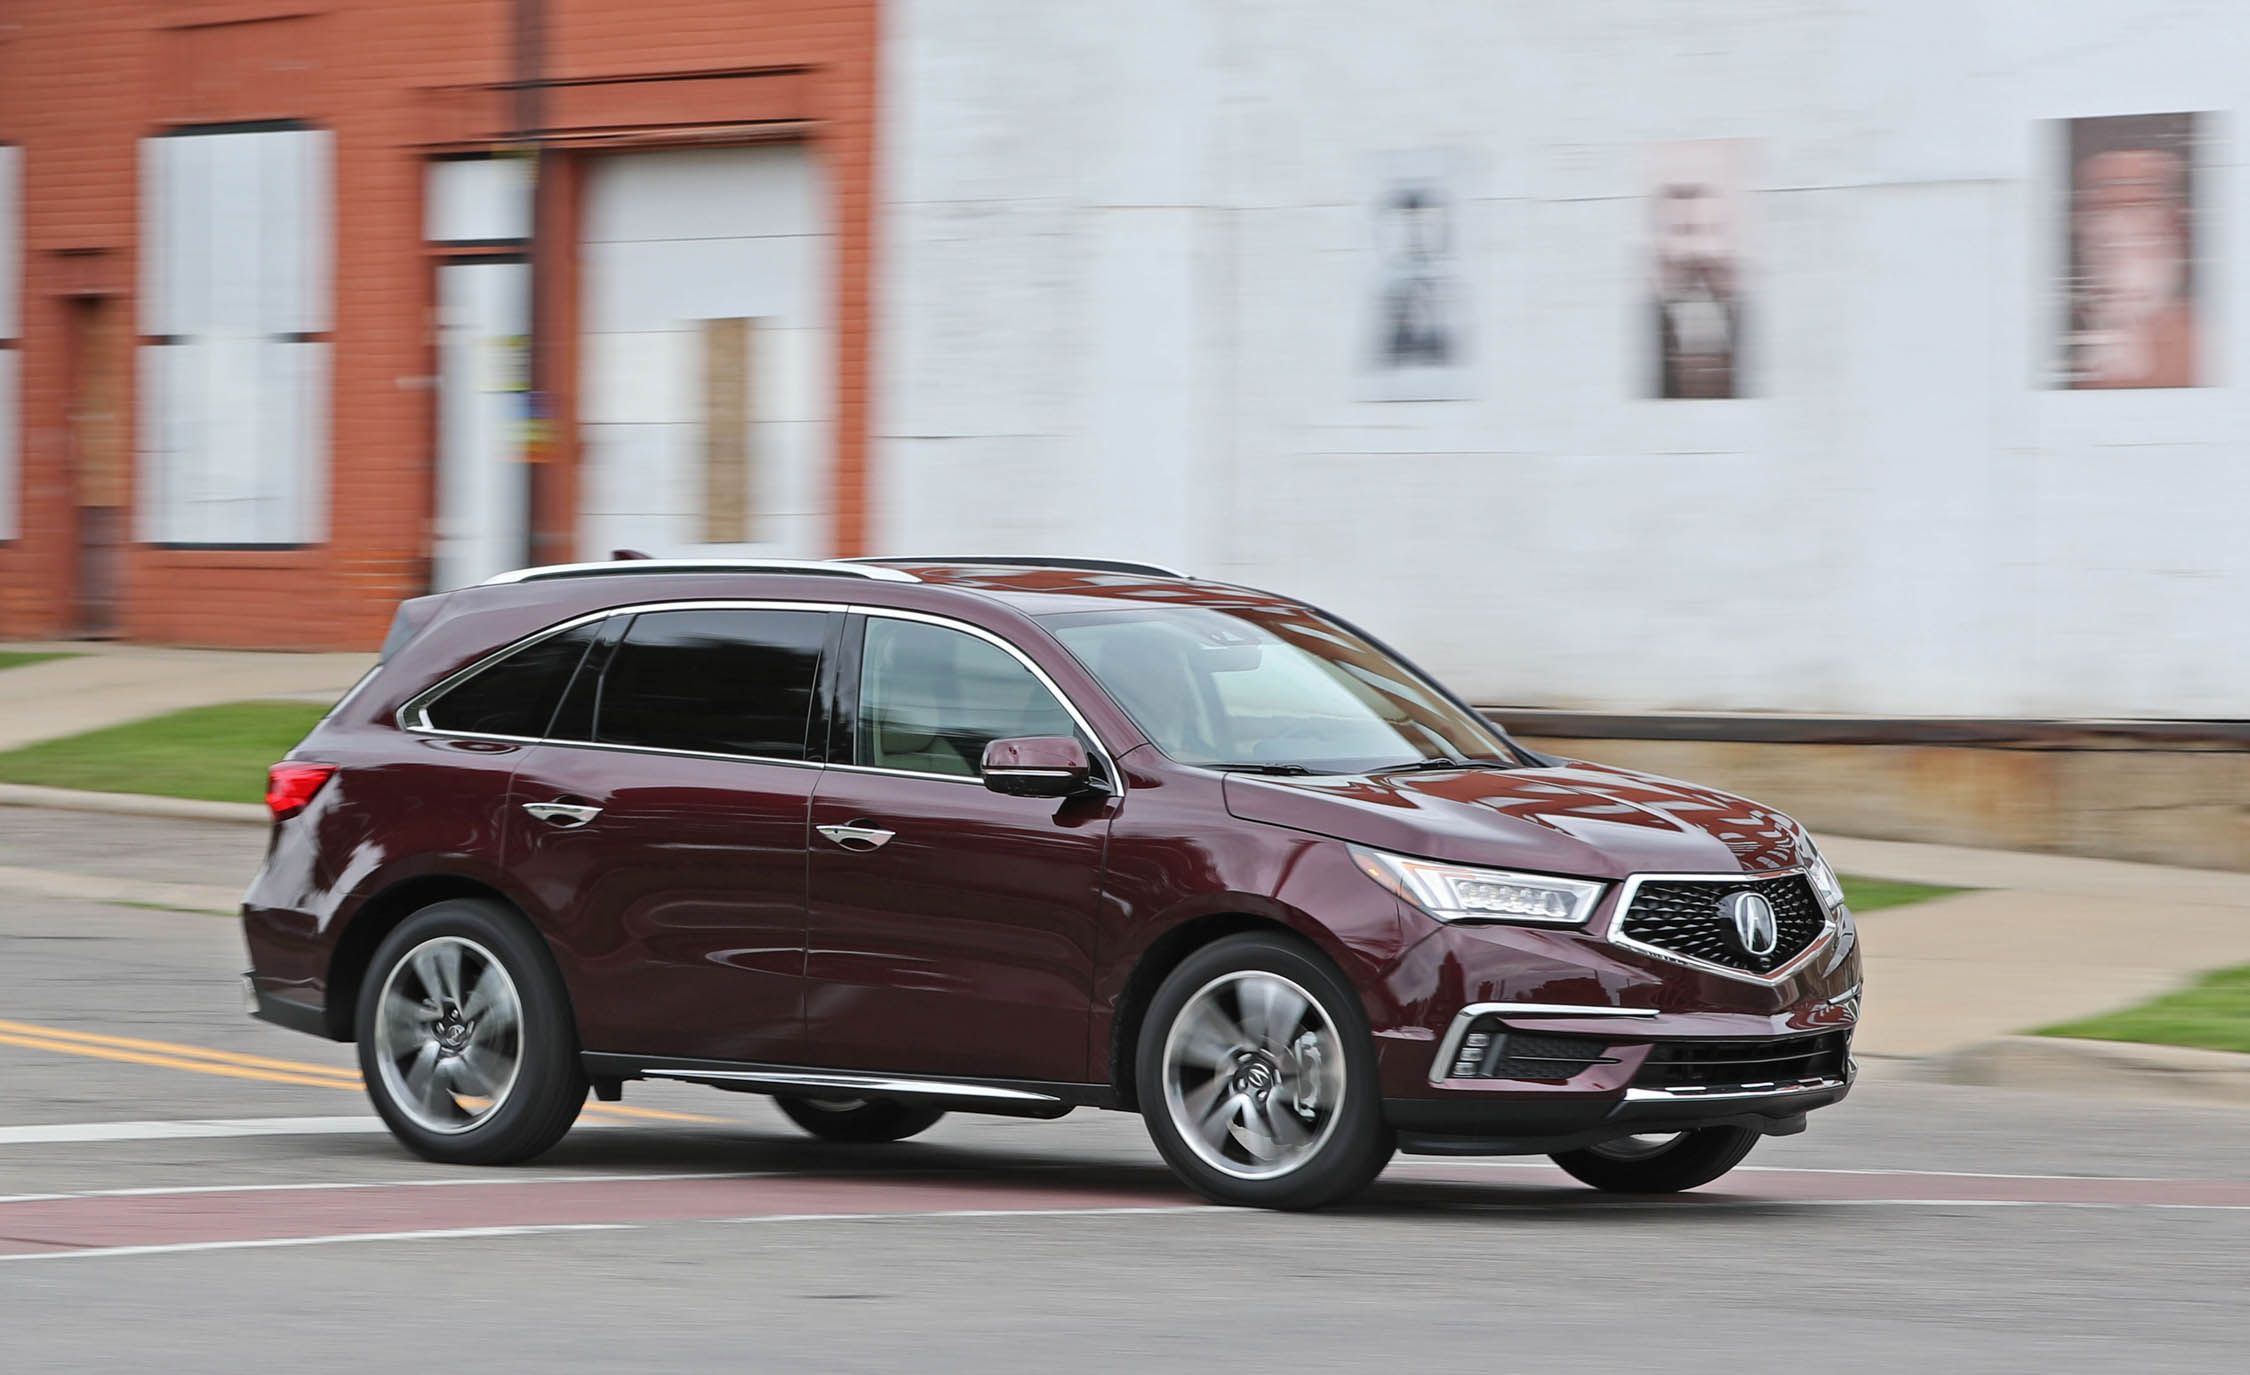 2017 Acura Mdx Test Drive (View 3 of 22)